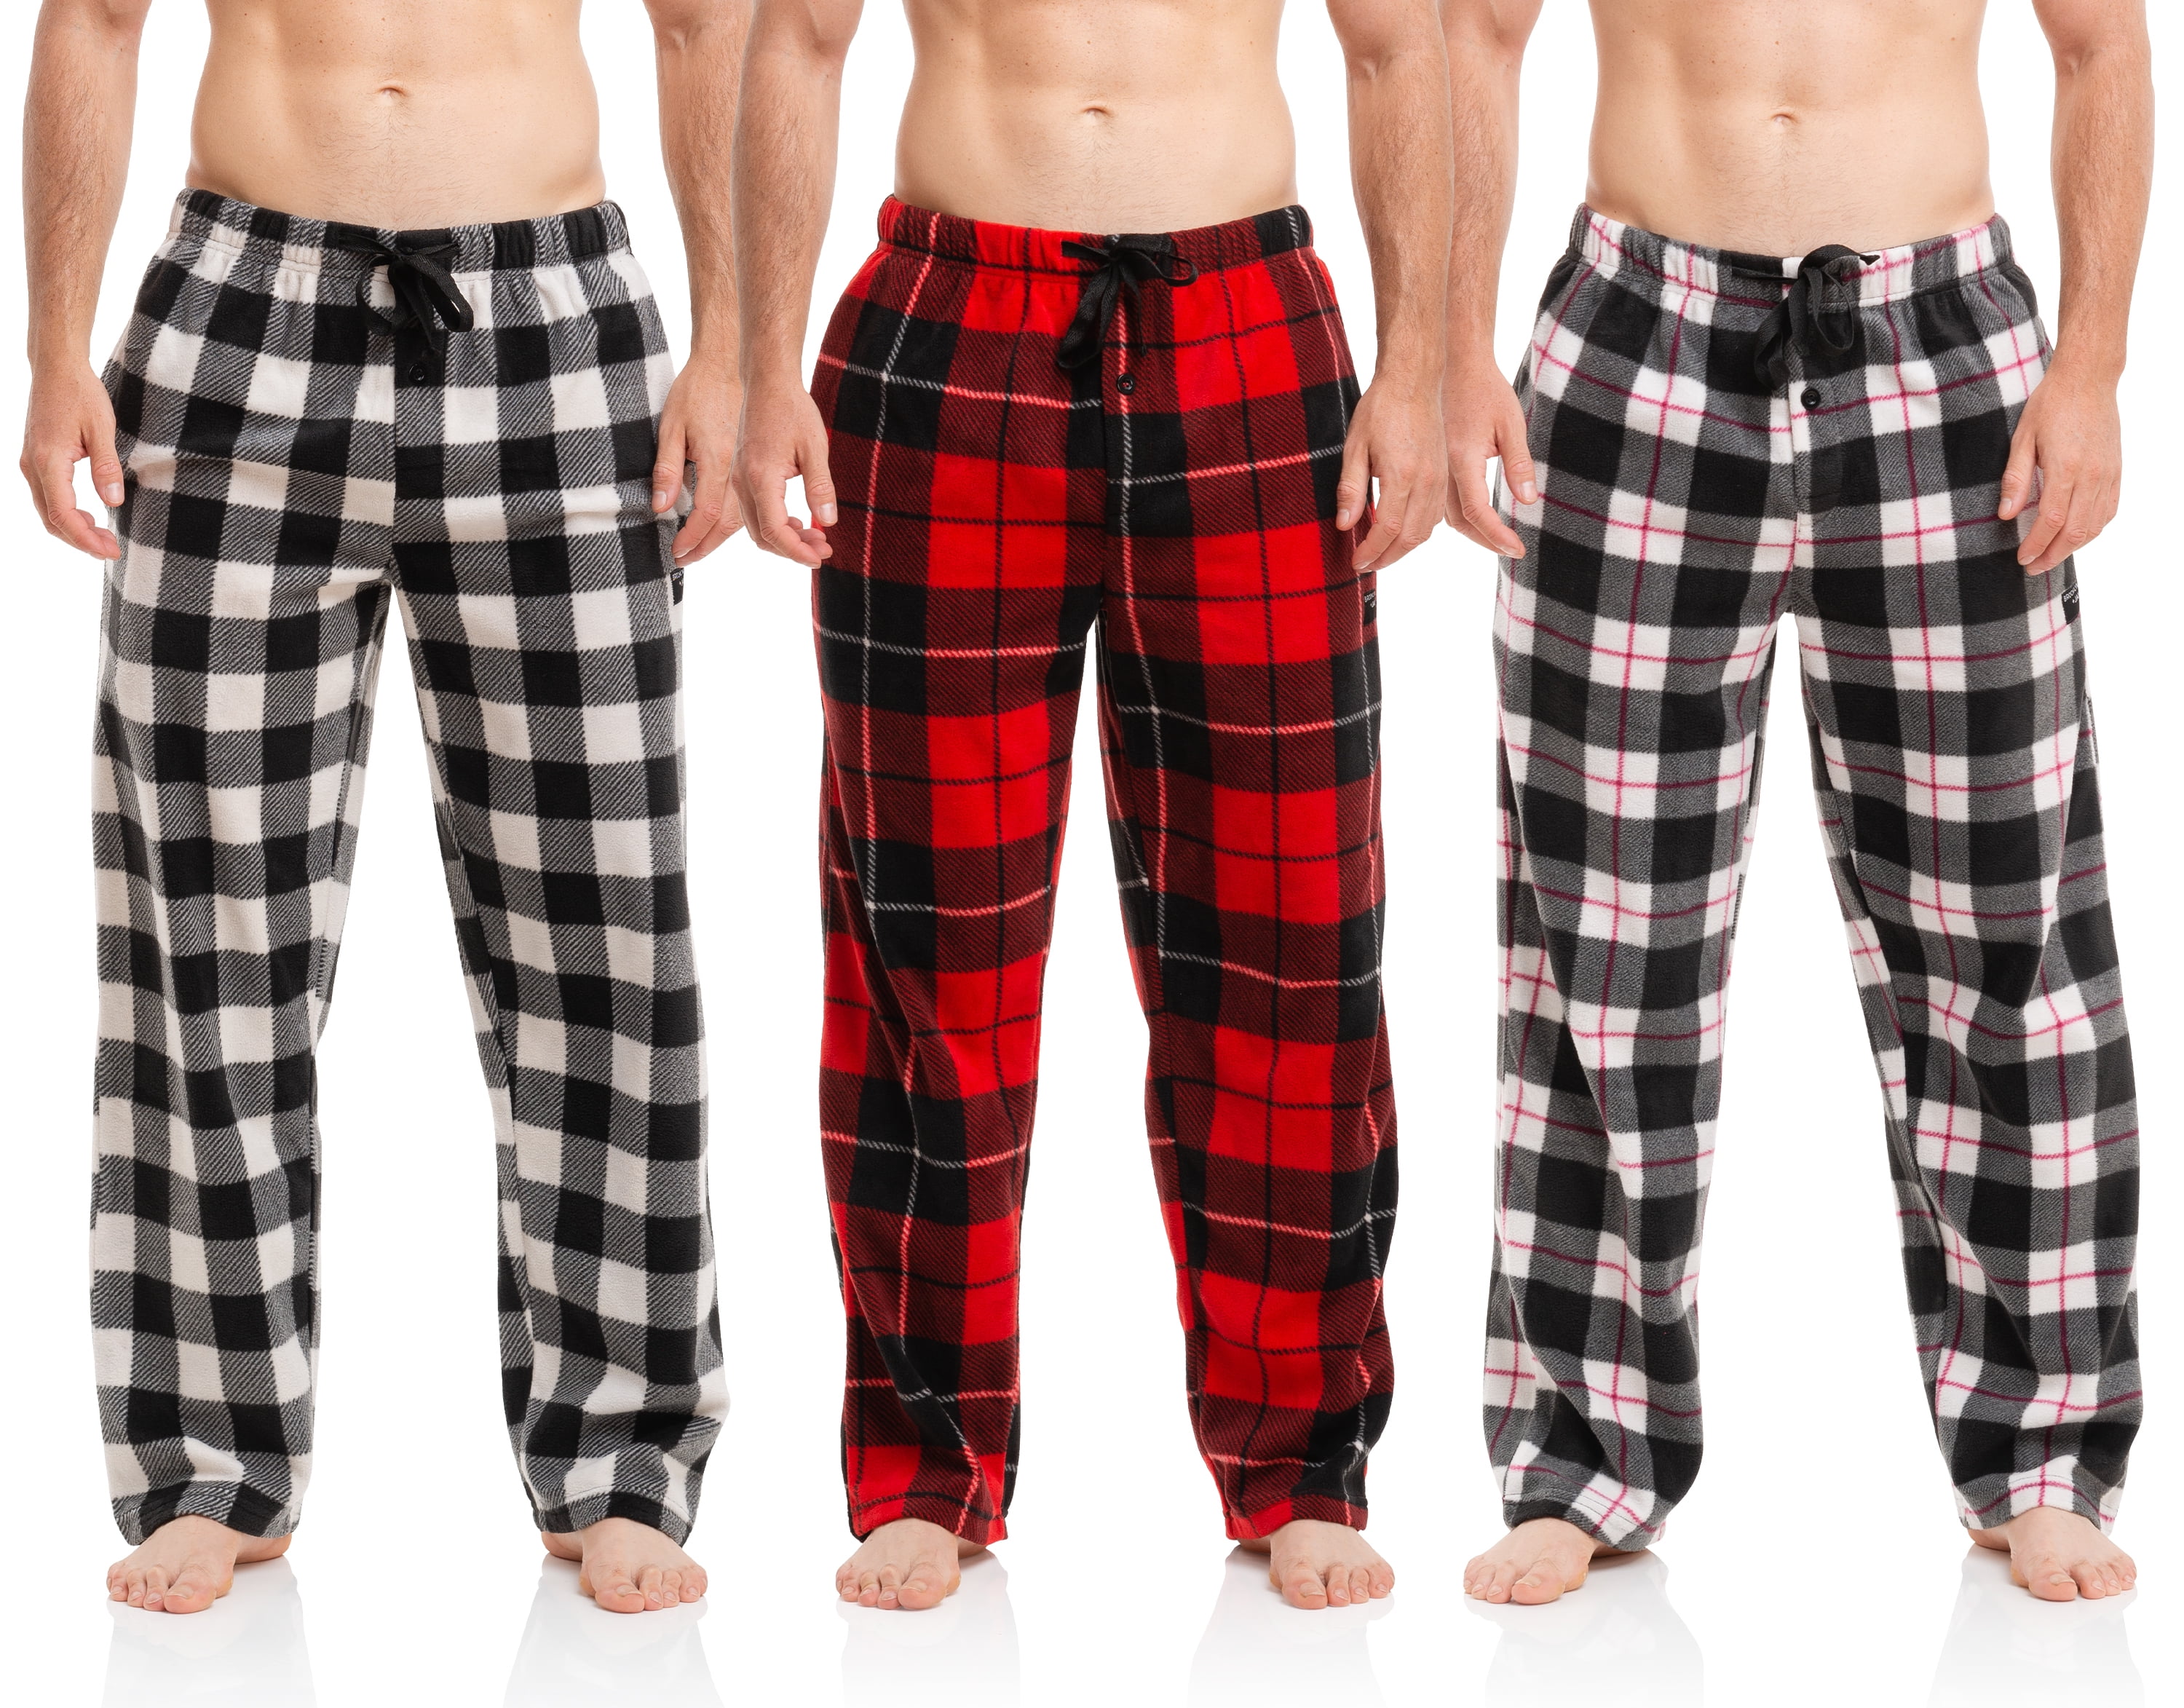 Brooklyn-Jax Men's Microfleece Pajama in XL size and pack of 3 ...